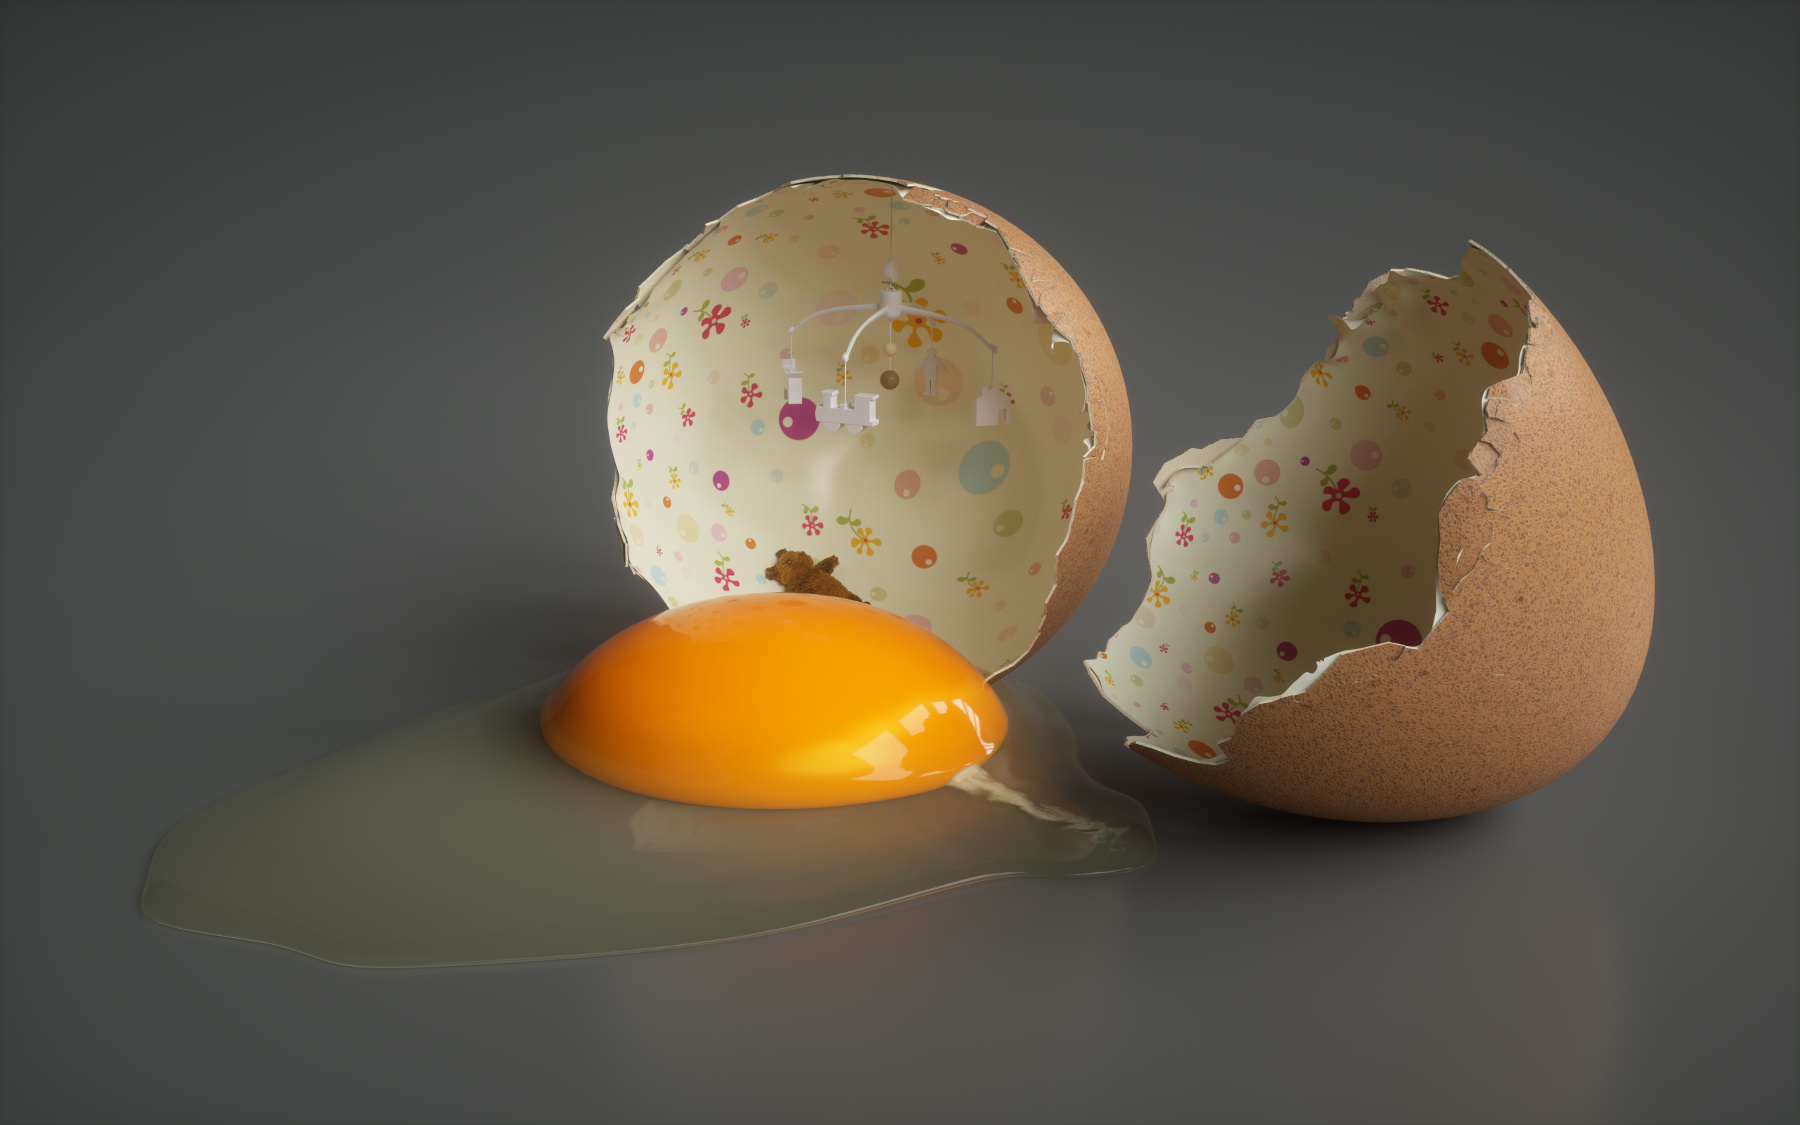 OTOY Forums • View topic - Variations on a broken egg